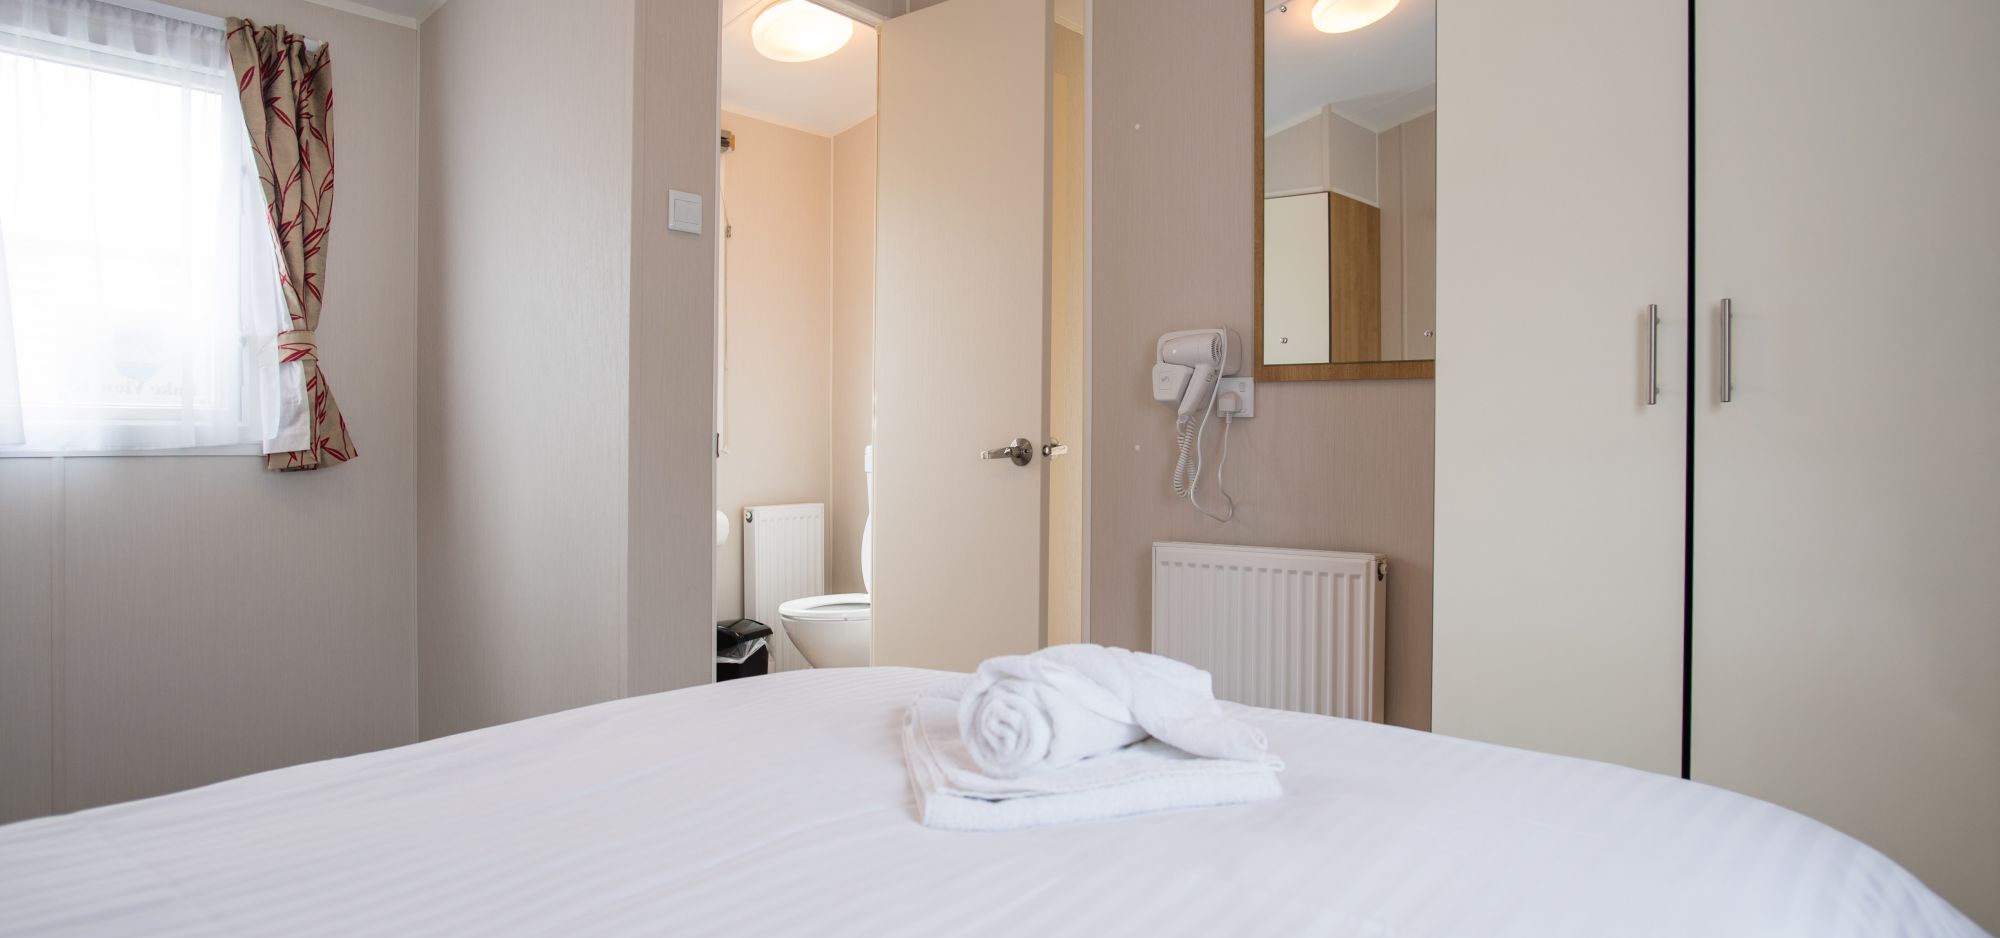 Many of our caravans come with ensuite bathrooms